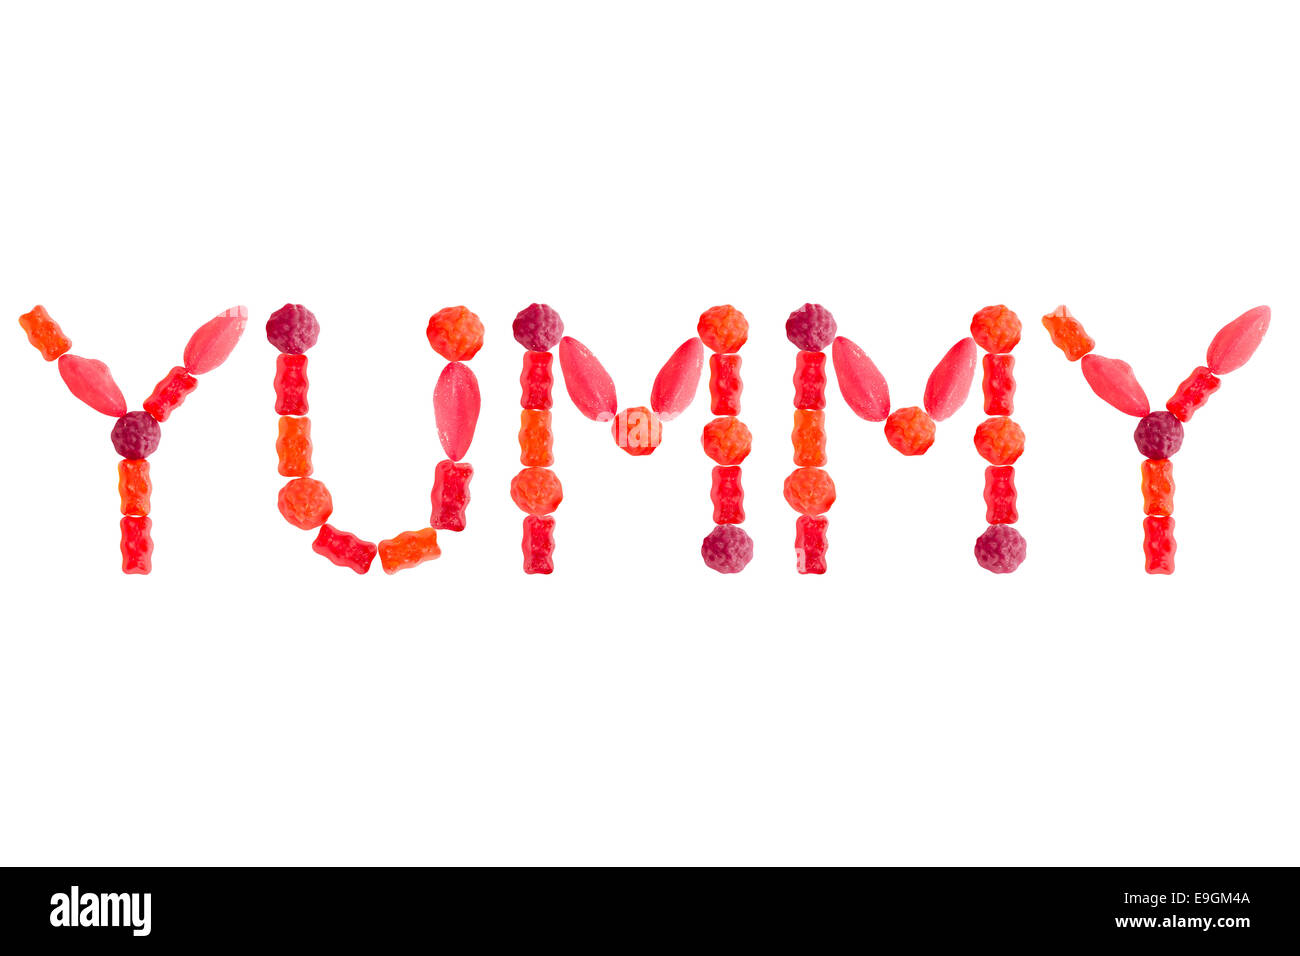 Word YUMMY made of red sugary candies, isolated on white background Stock Photo